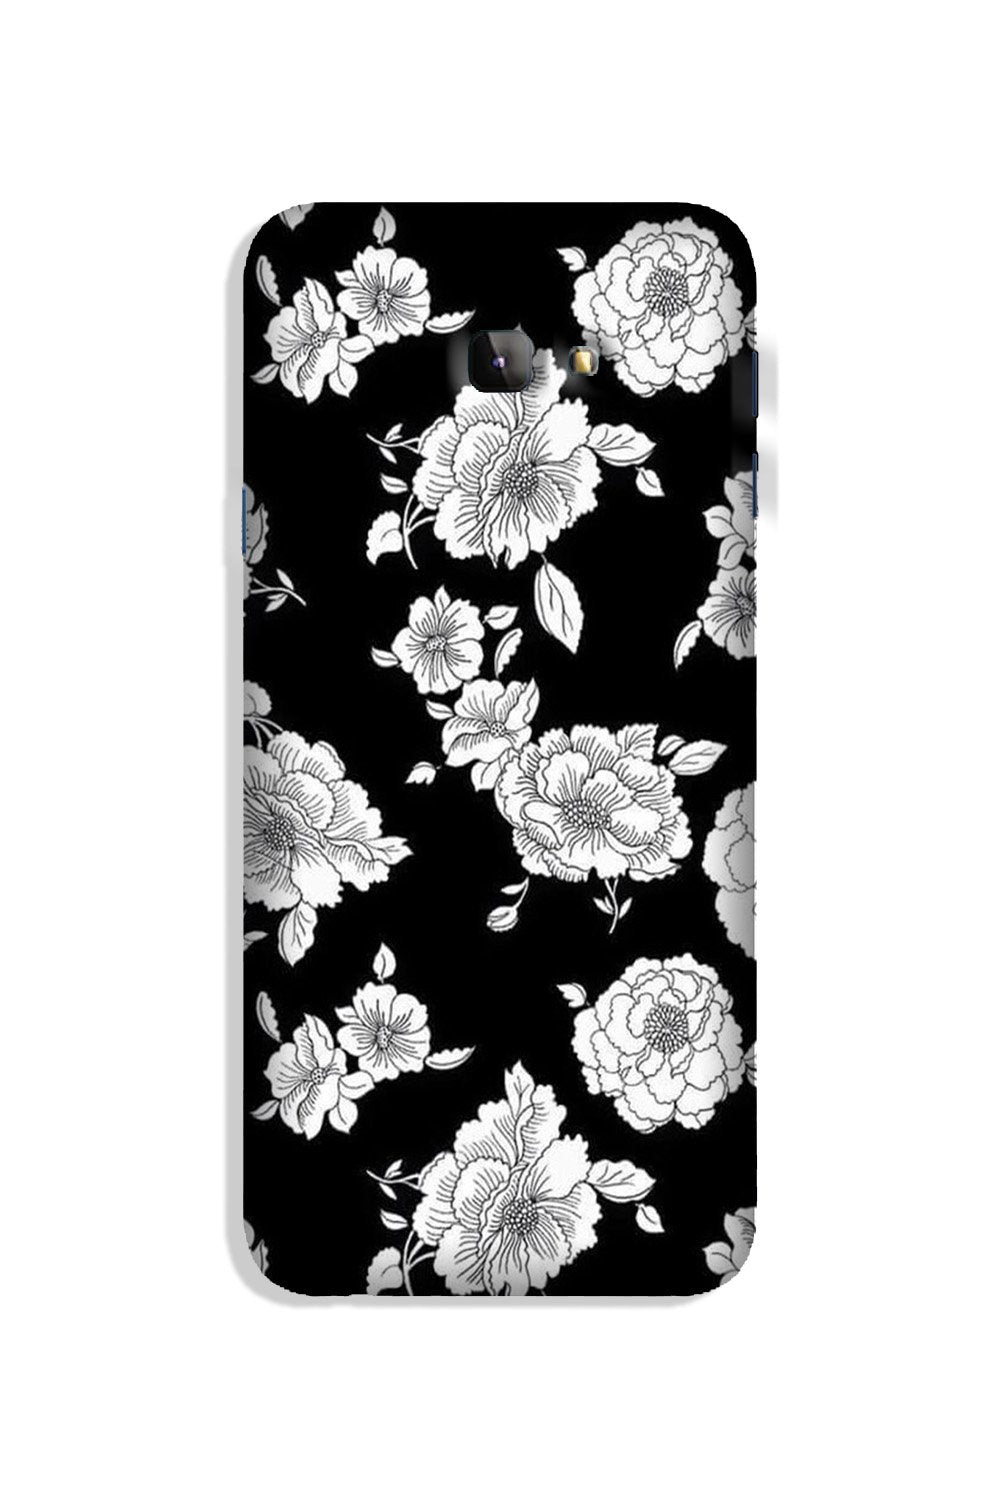 White flowers Black Background Case for Galaxy J4 Plus